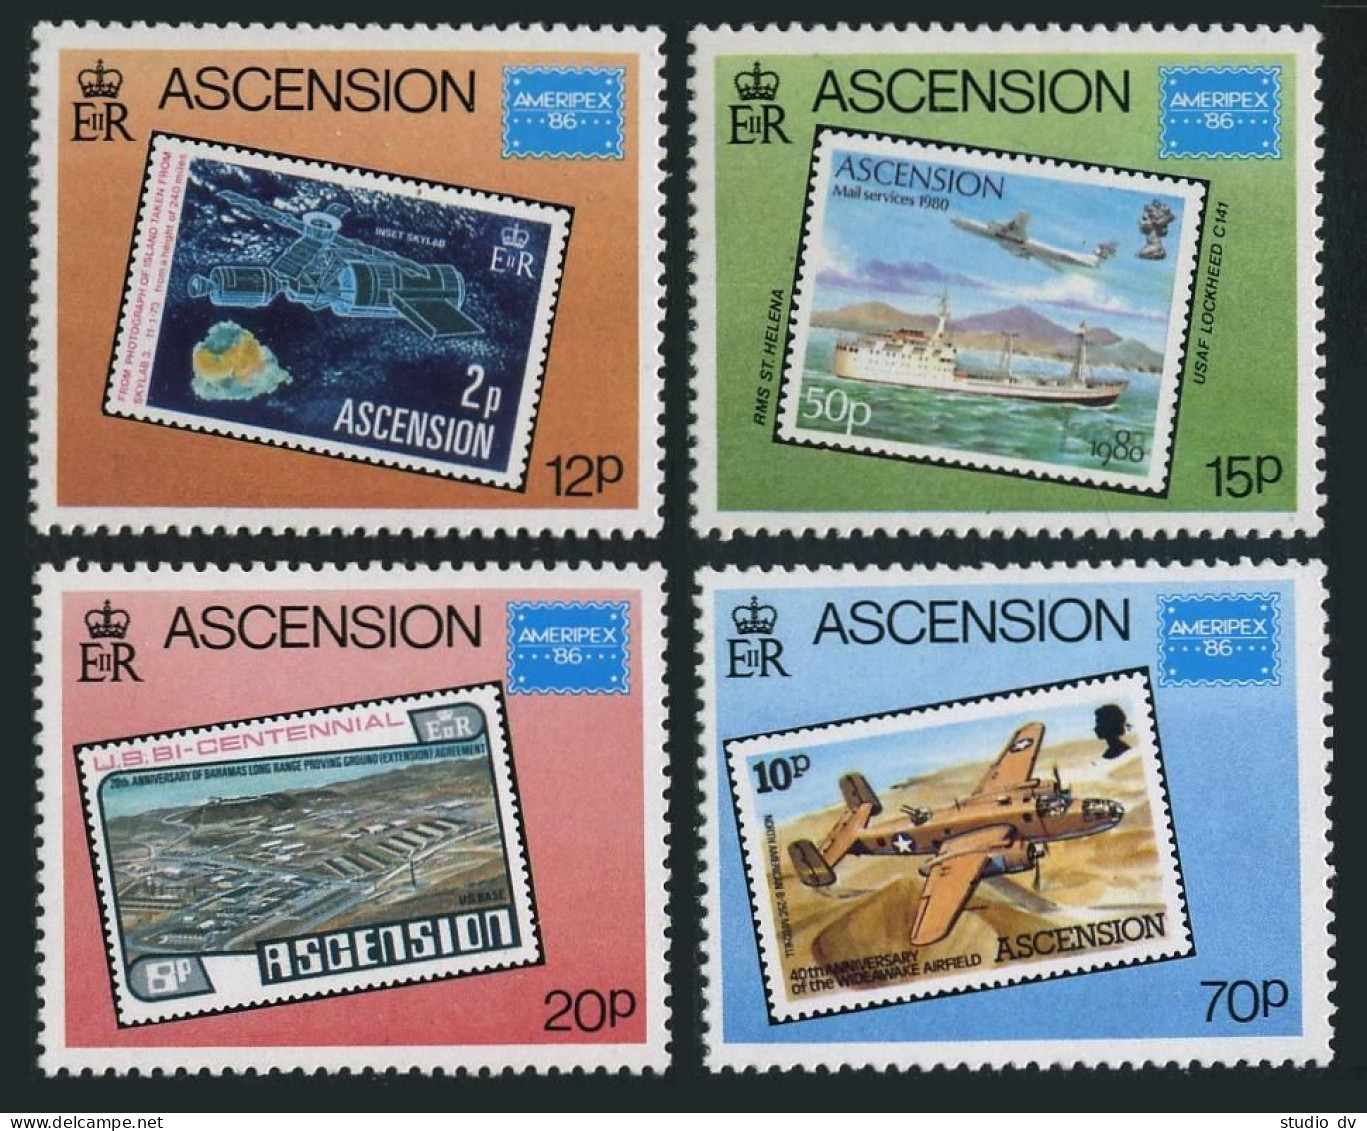 Ascension 394-398,MNH.Michel 403-406,Bl.16. AMERIPEX-1986.Ship,Helicopter,Map. - Ascension